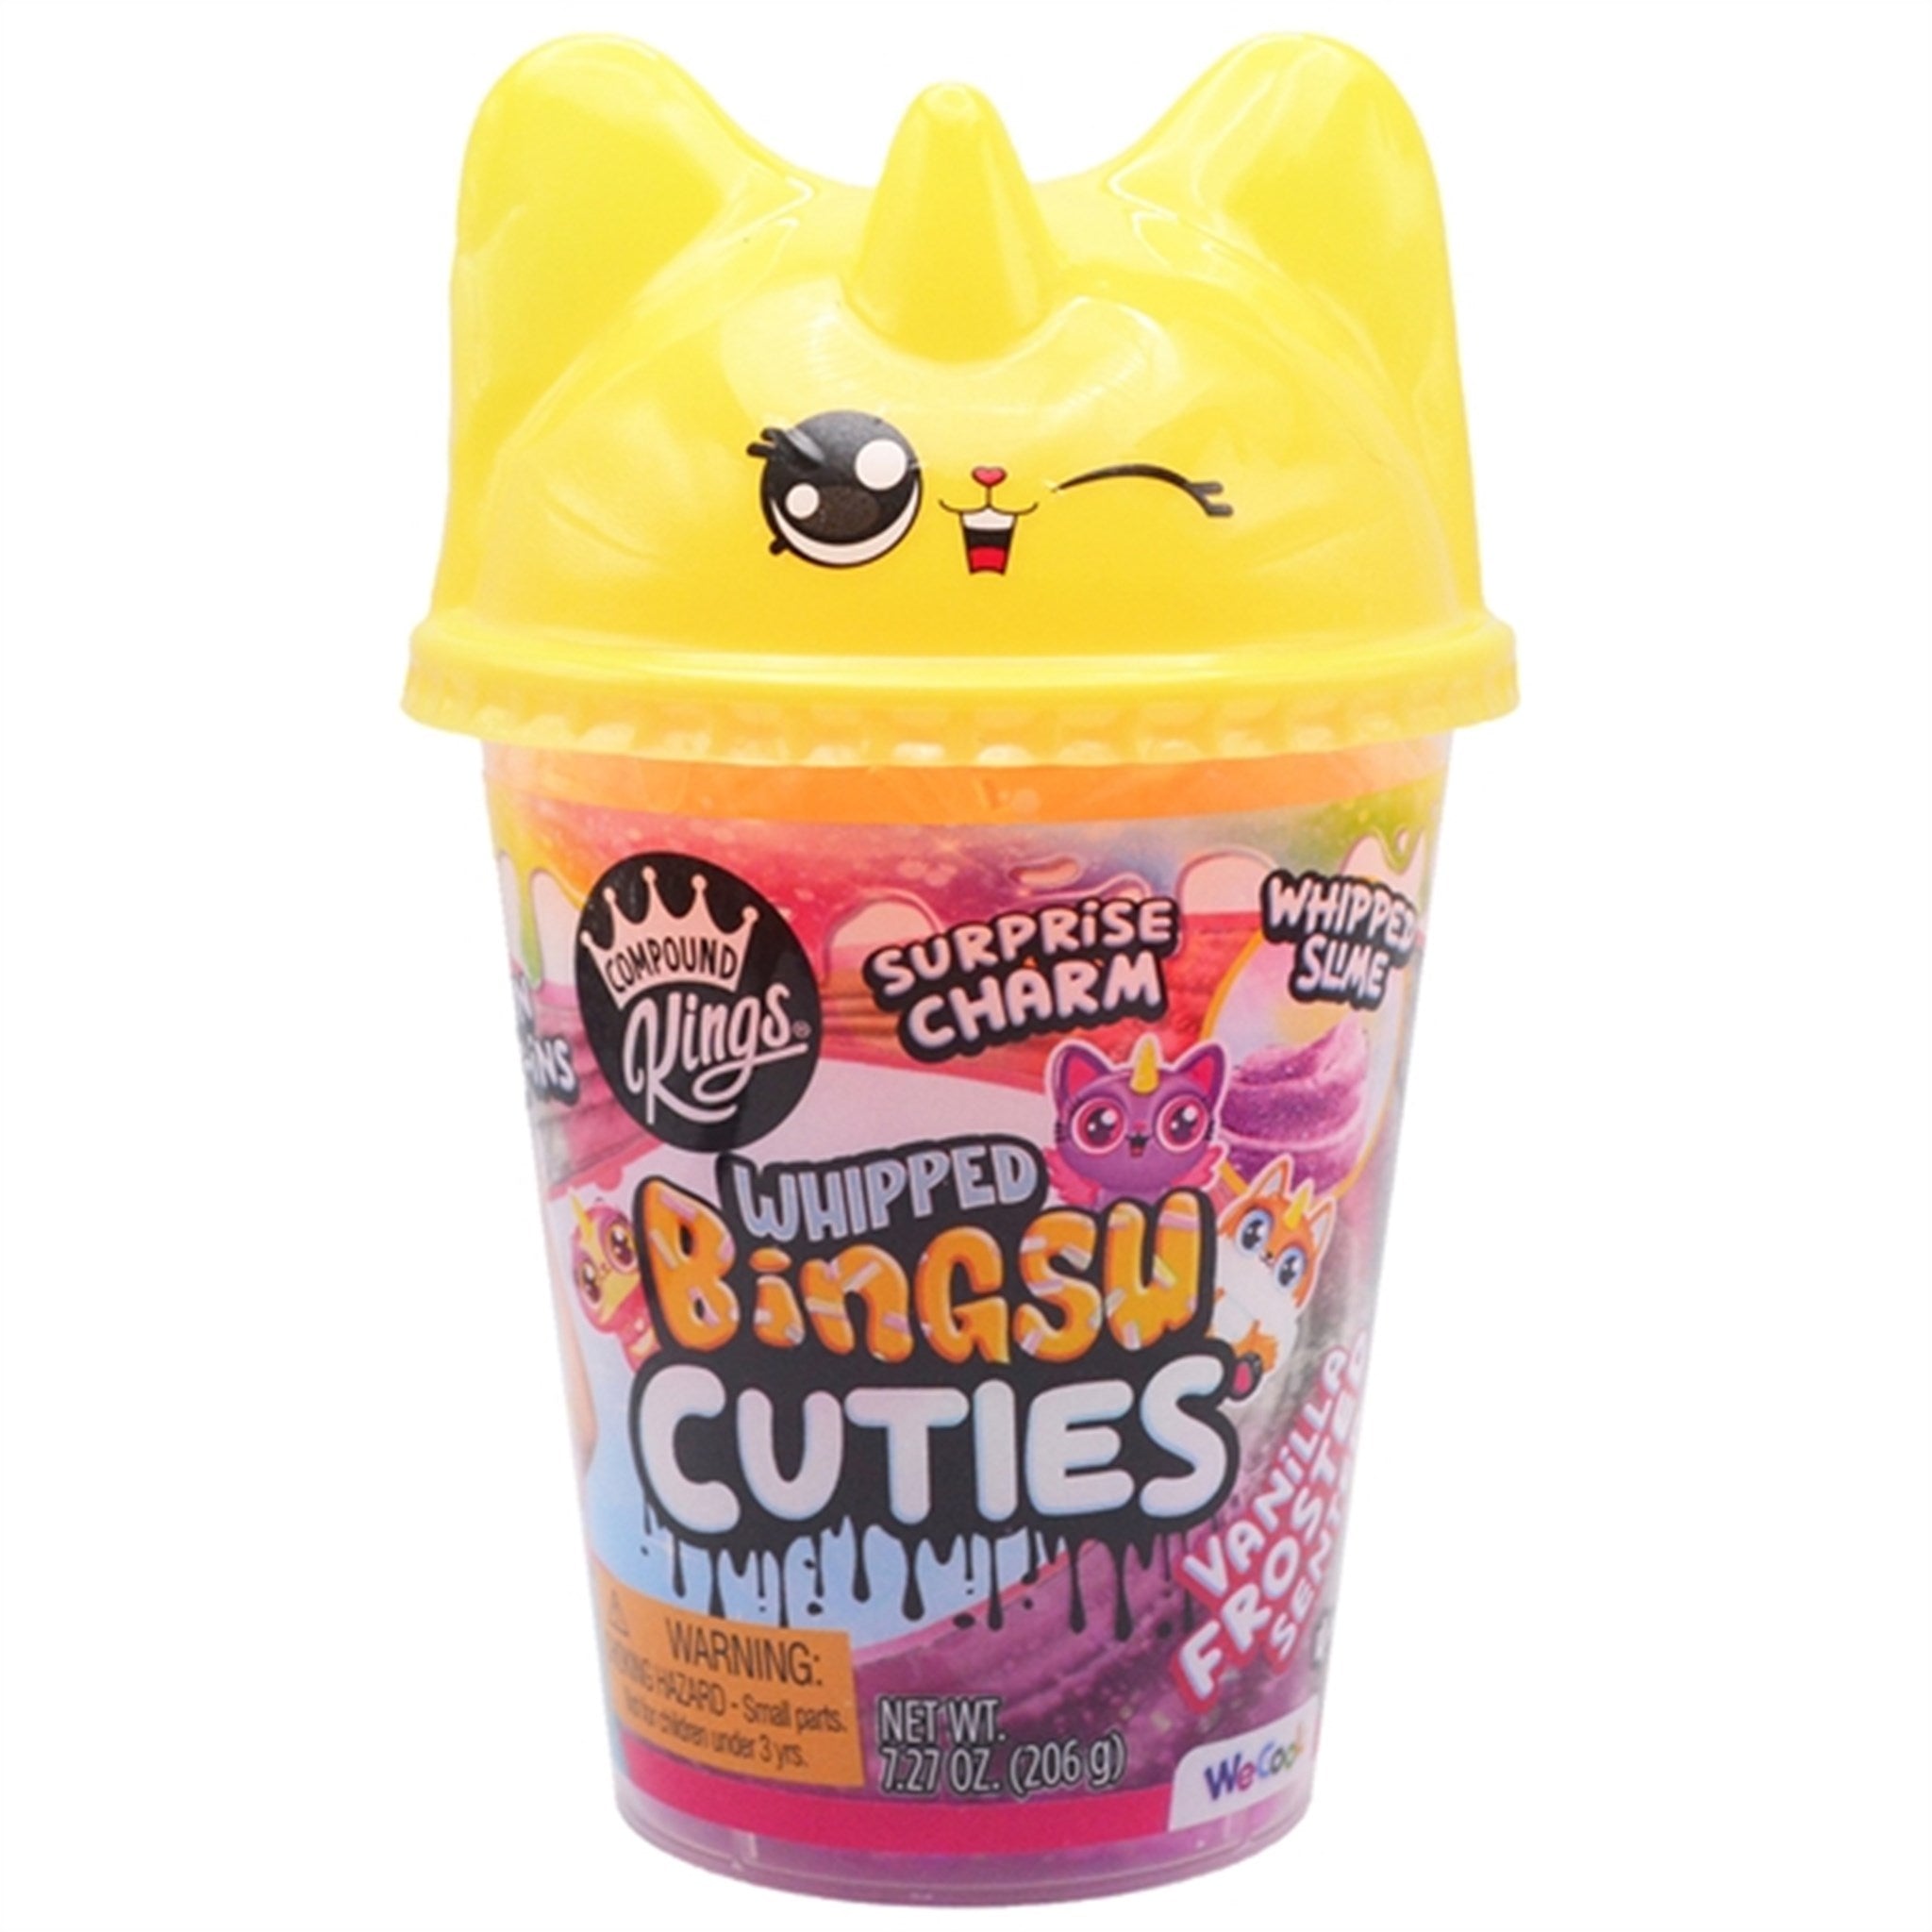 Compound Kings Scented Slime Bingsu Cuties Vanilla Frosted